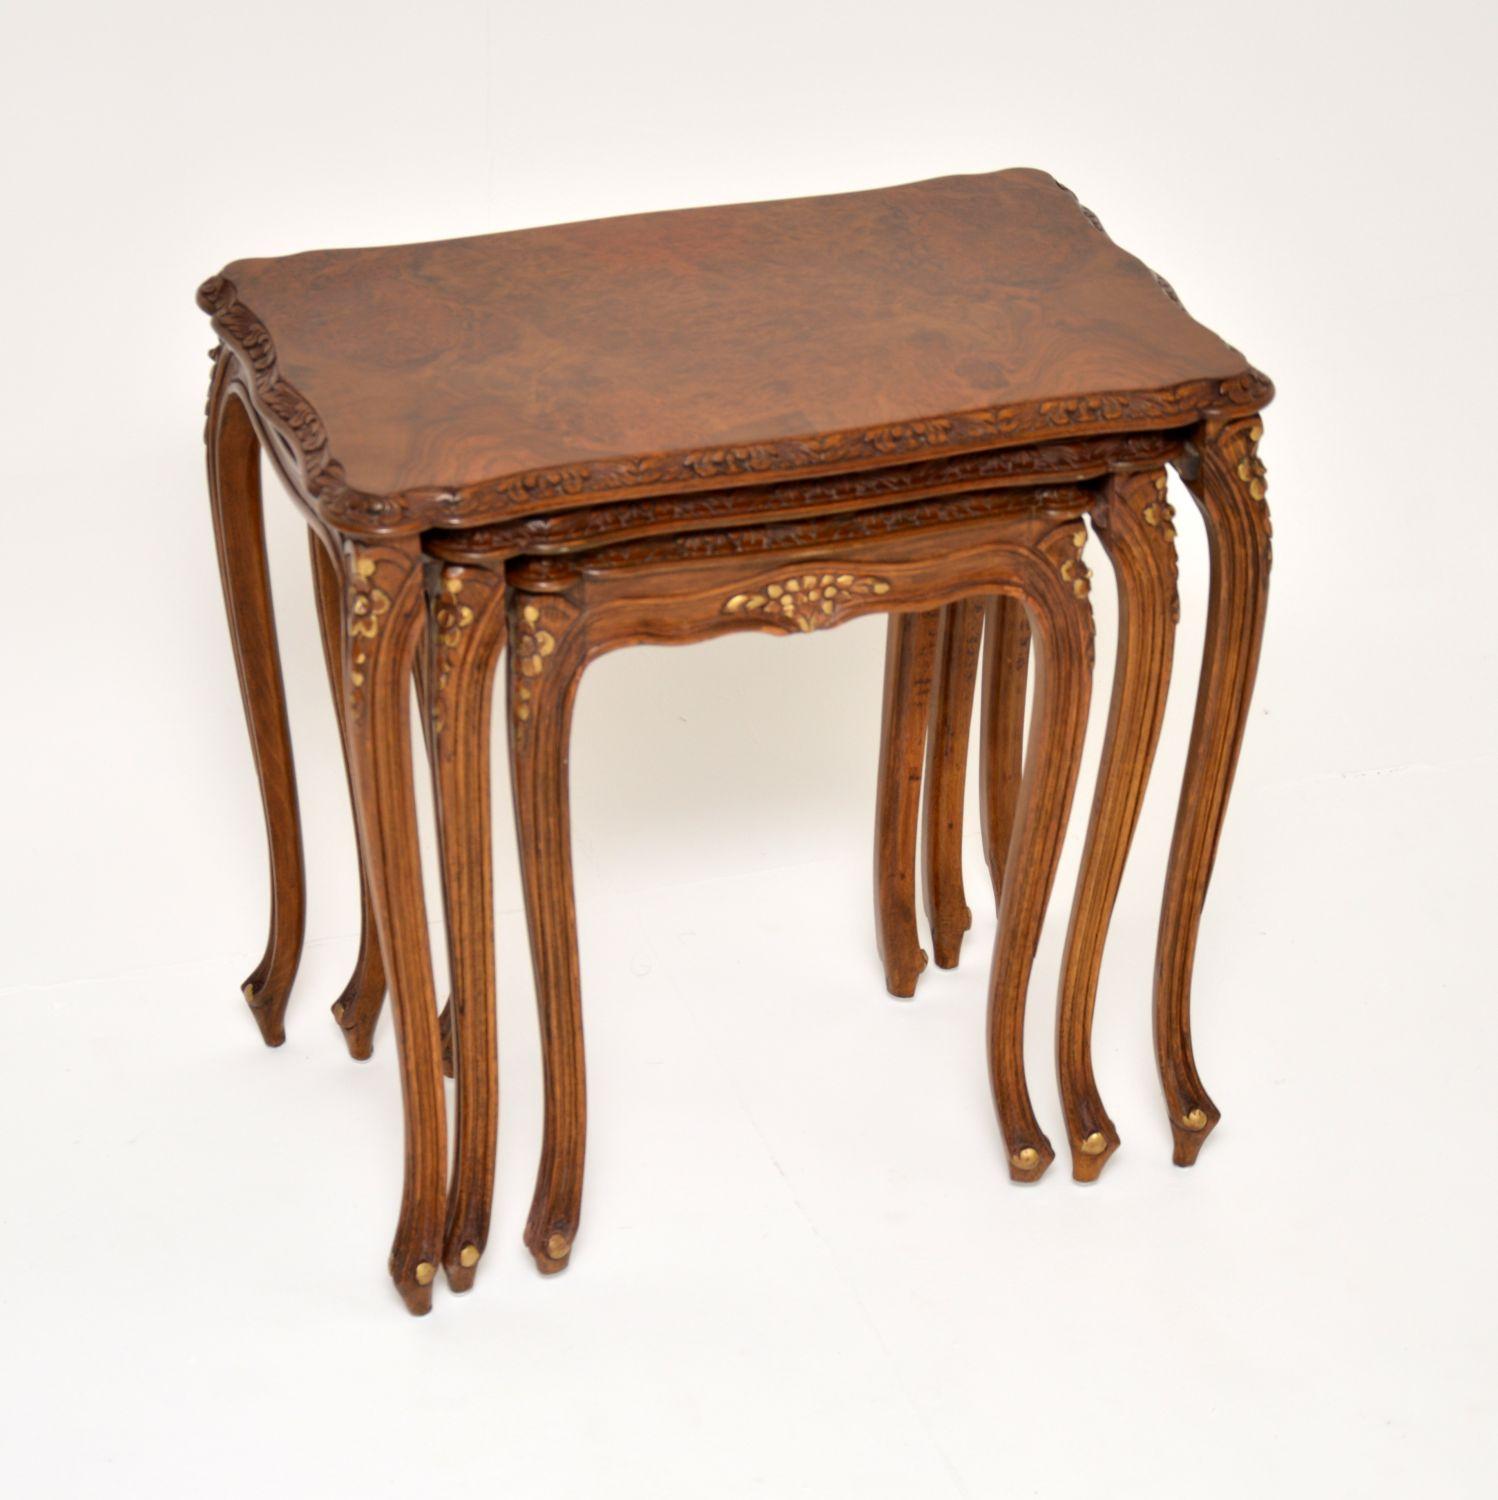 A beautiful antique French style walnut nest of tables with burr walnut tops, dating from around the 1930’s period.

The quality is superb, they are beautifully constructed with crisp floral carving and lovely serpentine shaped tops. The burr walnut